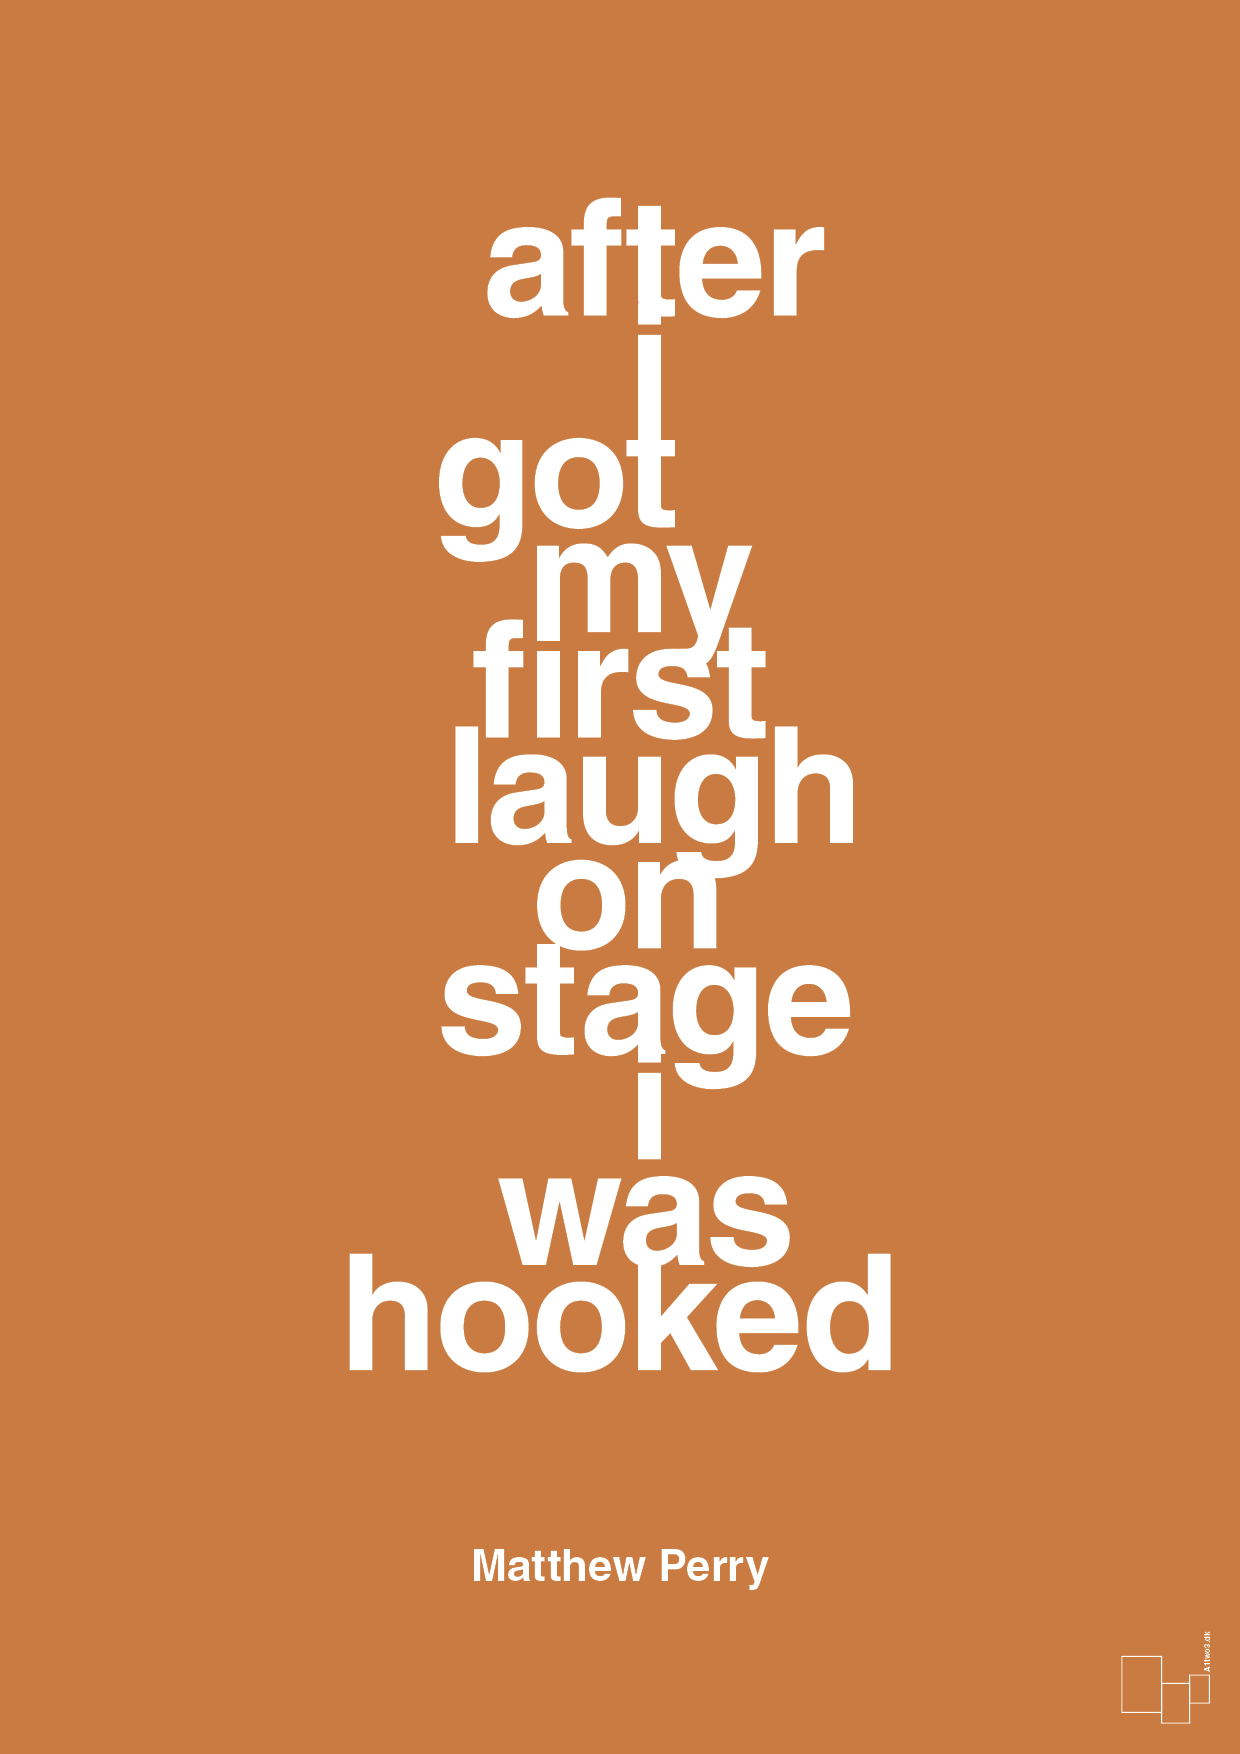 after i got my first laugh on stage i was hooked - Plakat med Citater i Rumba Orange